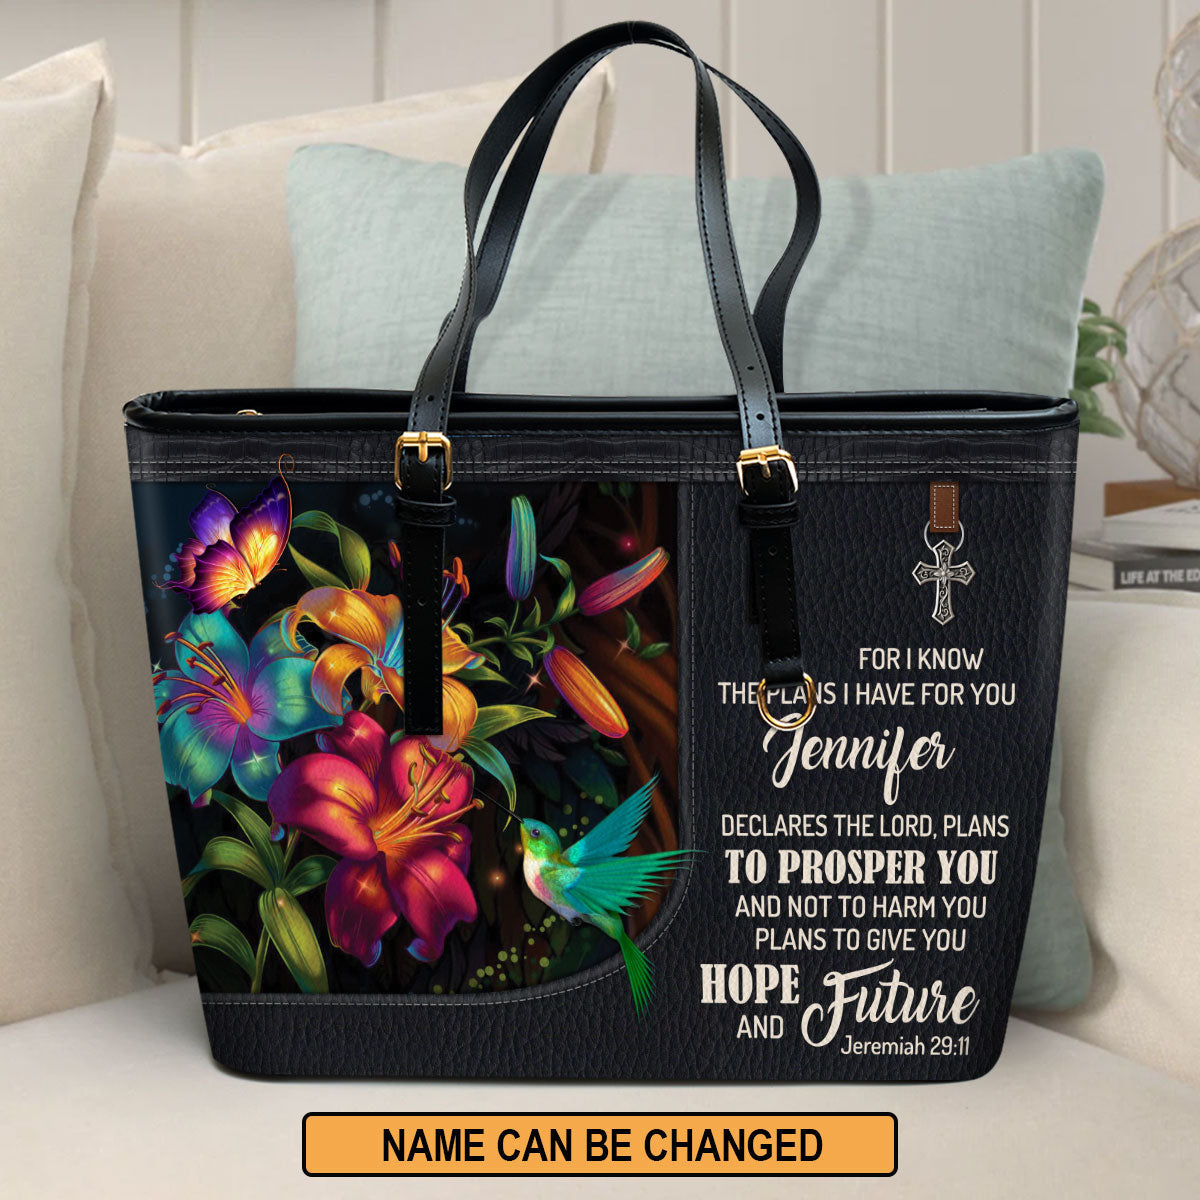 Personalized Large Leather Tote Bag For I Know The Plans I Have For You - Spiritual Gifts For Christian Women